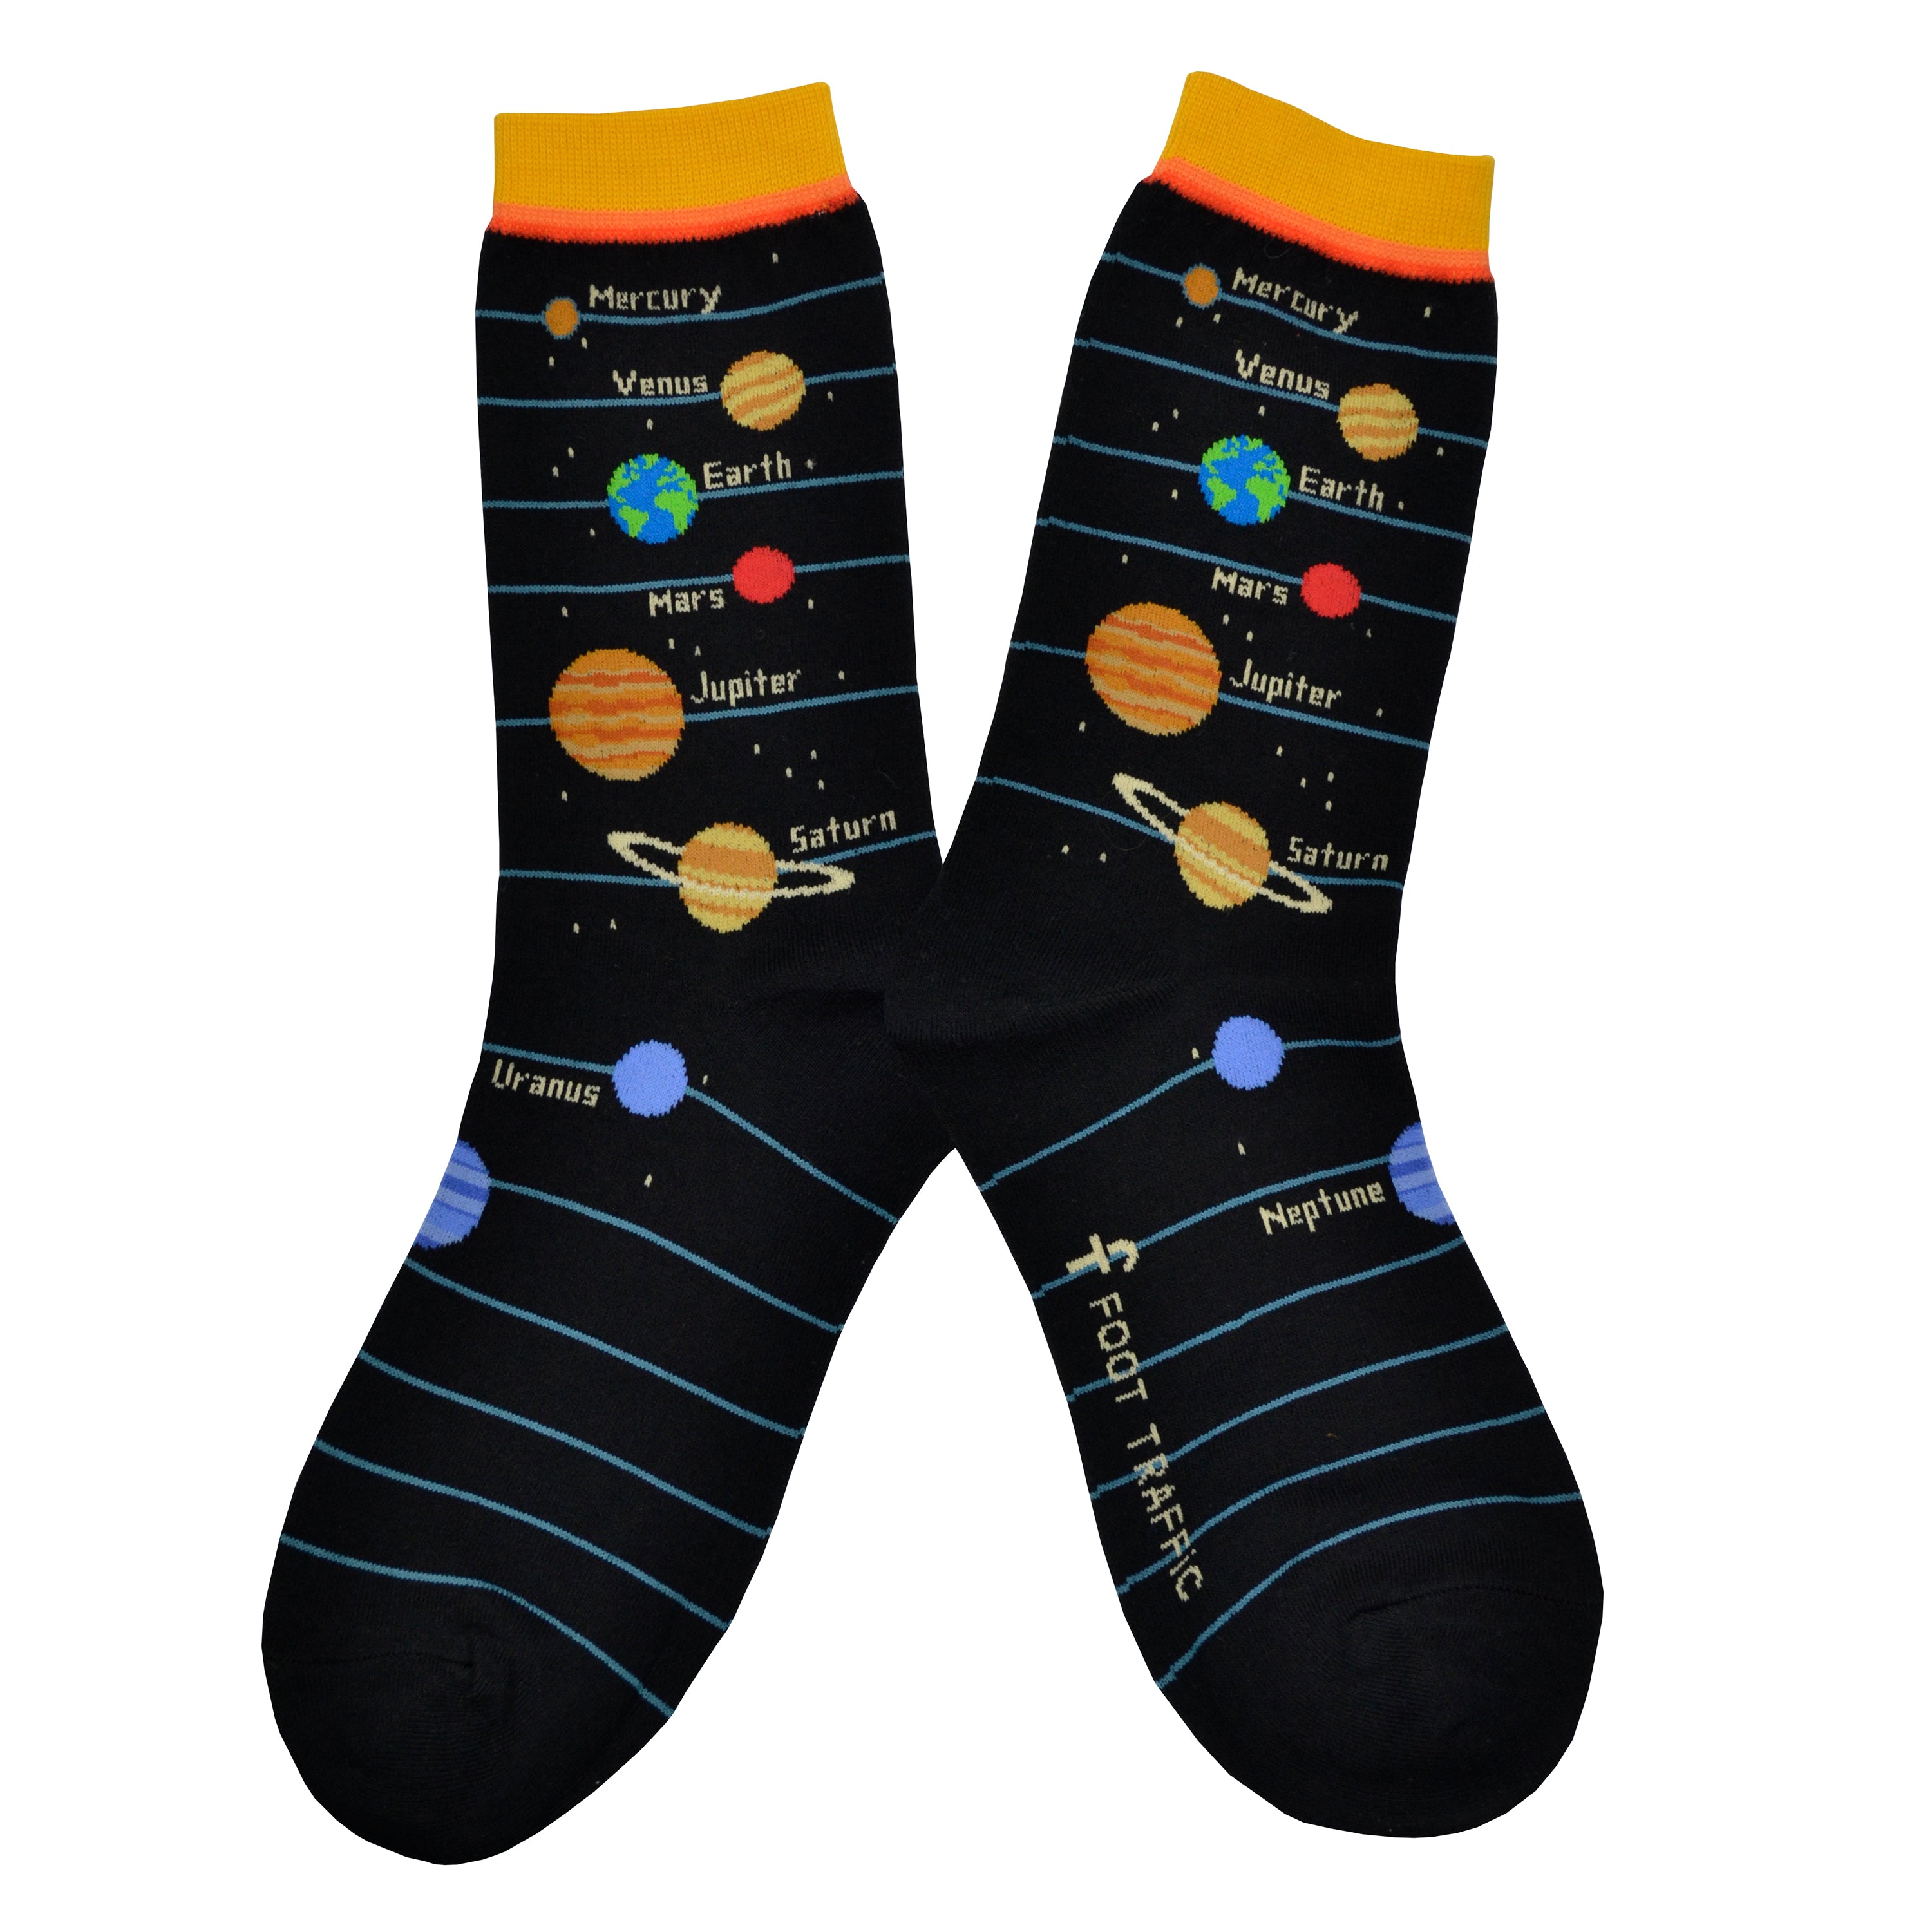 These black cotton women's crew socks with a yellow cuff by the brand Foot Traffic feature the planets and their names Mercury, Venus, Earth, Mars, Jupiter, Saturn, Uranus and Neptune lined up running down the leg of the sock.